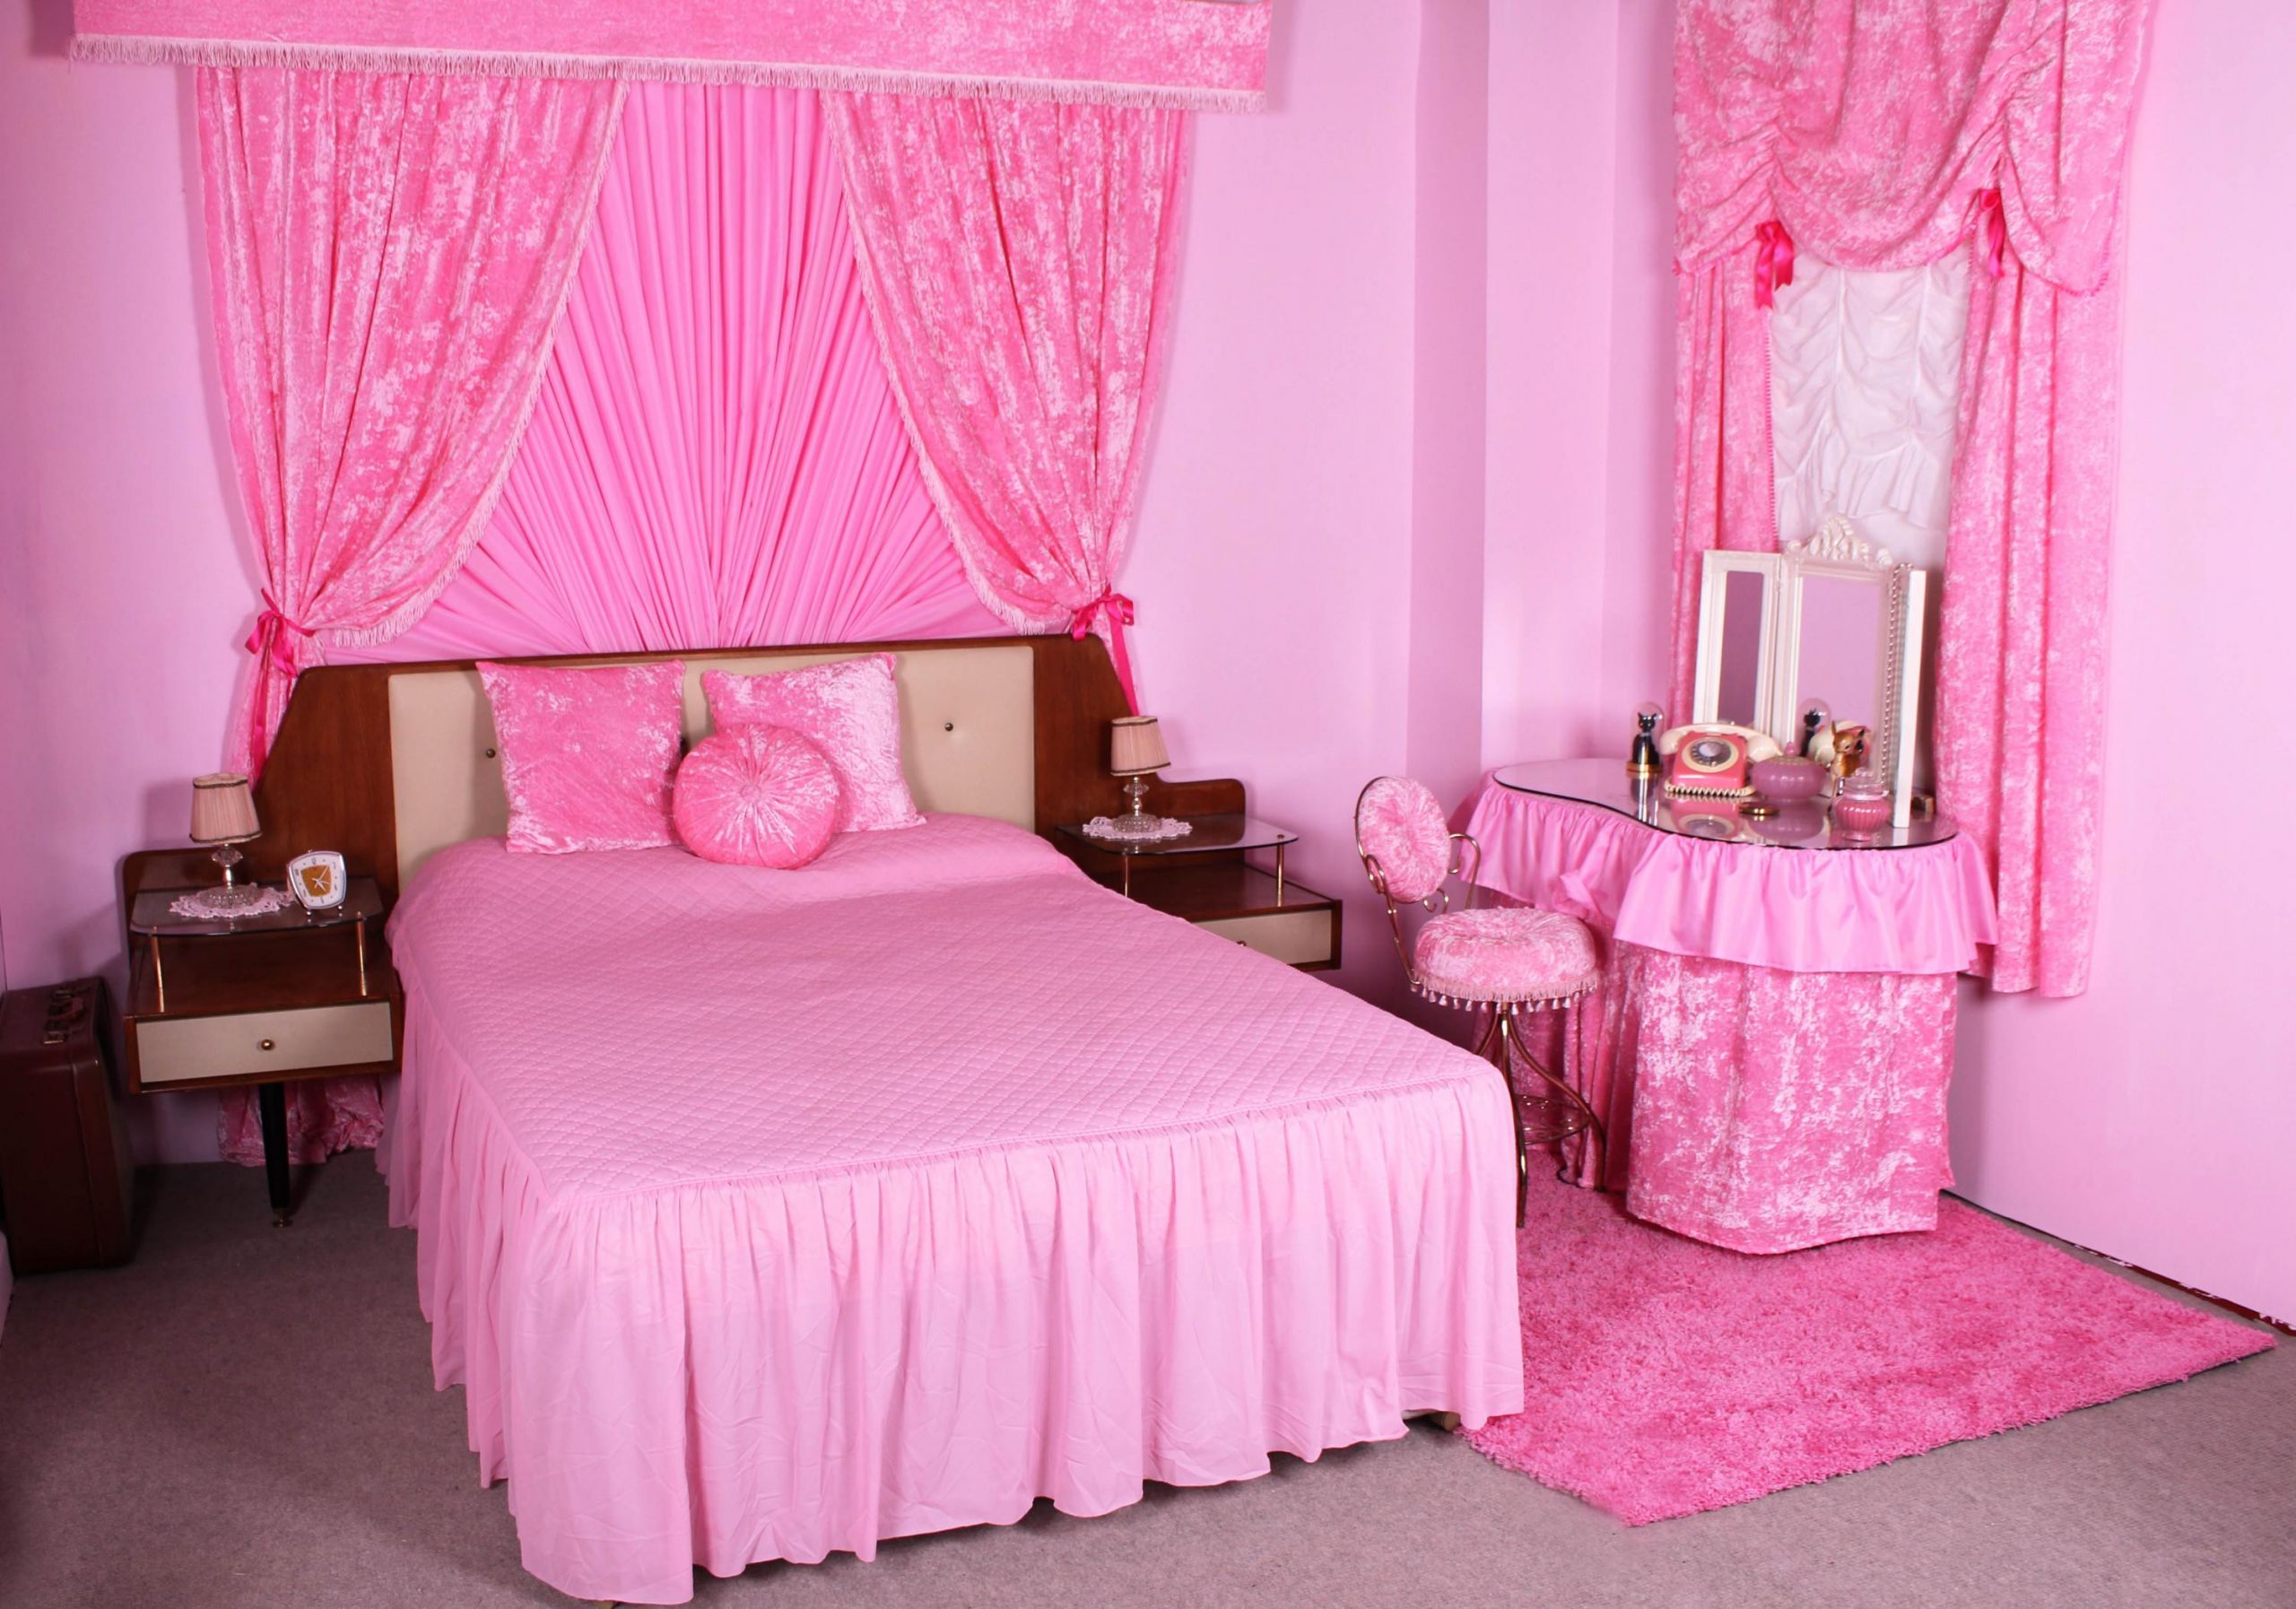 Pink Bedroom Decor
 40 Best Dream Bedroom Design Ideas In All Colors And Sizes